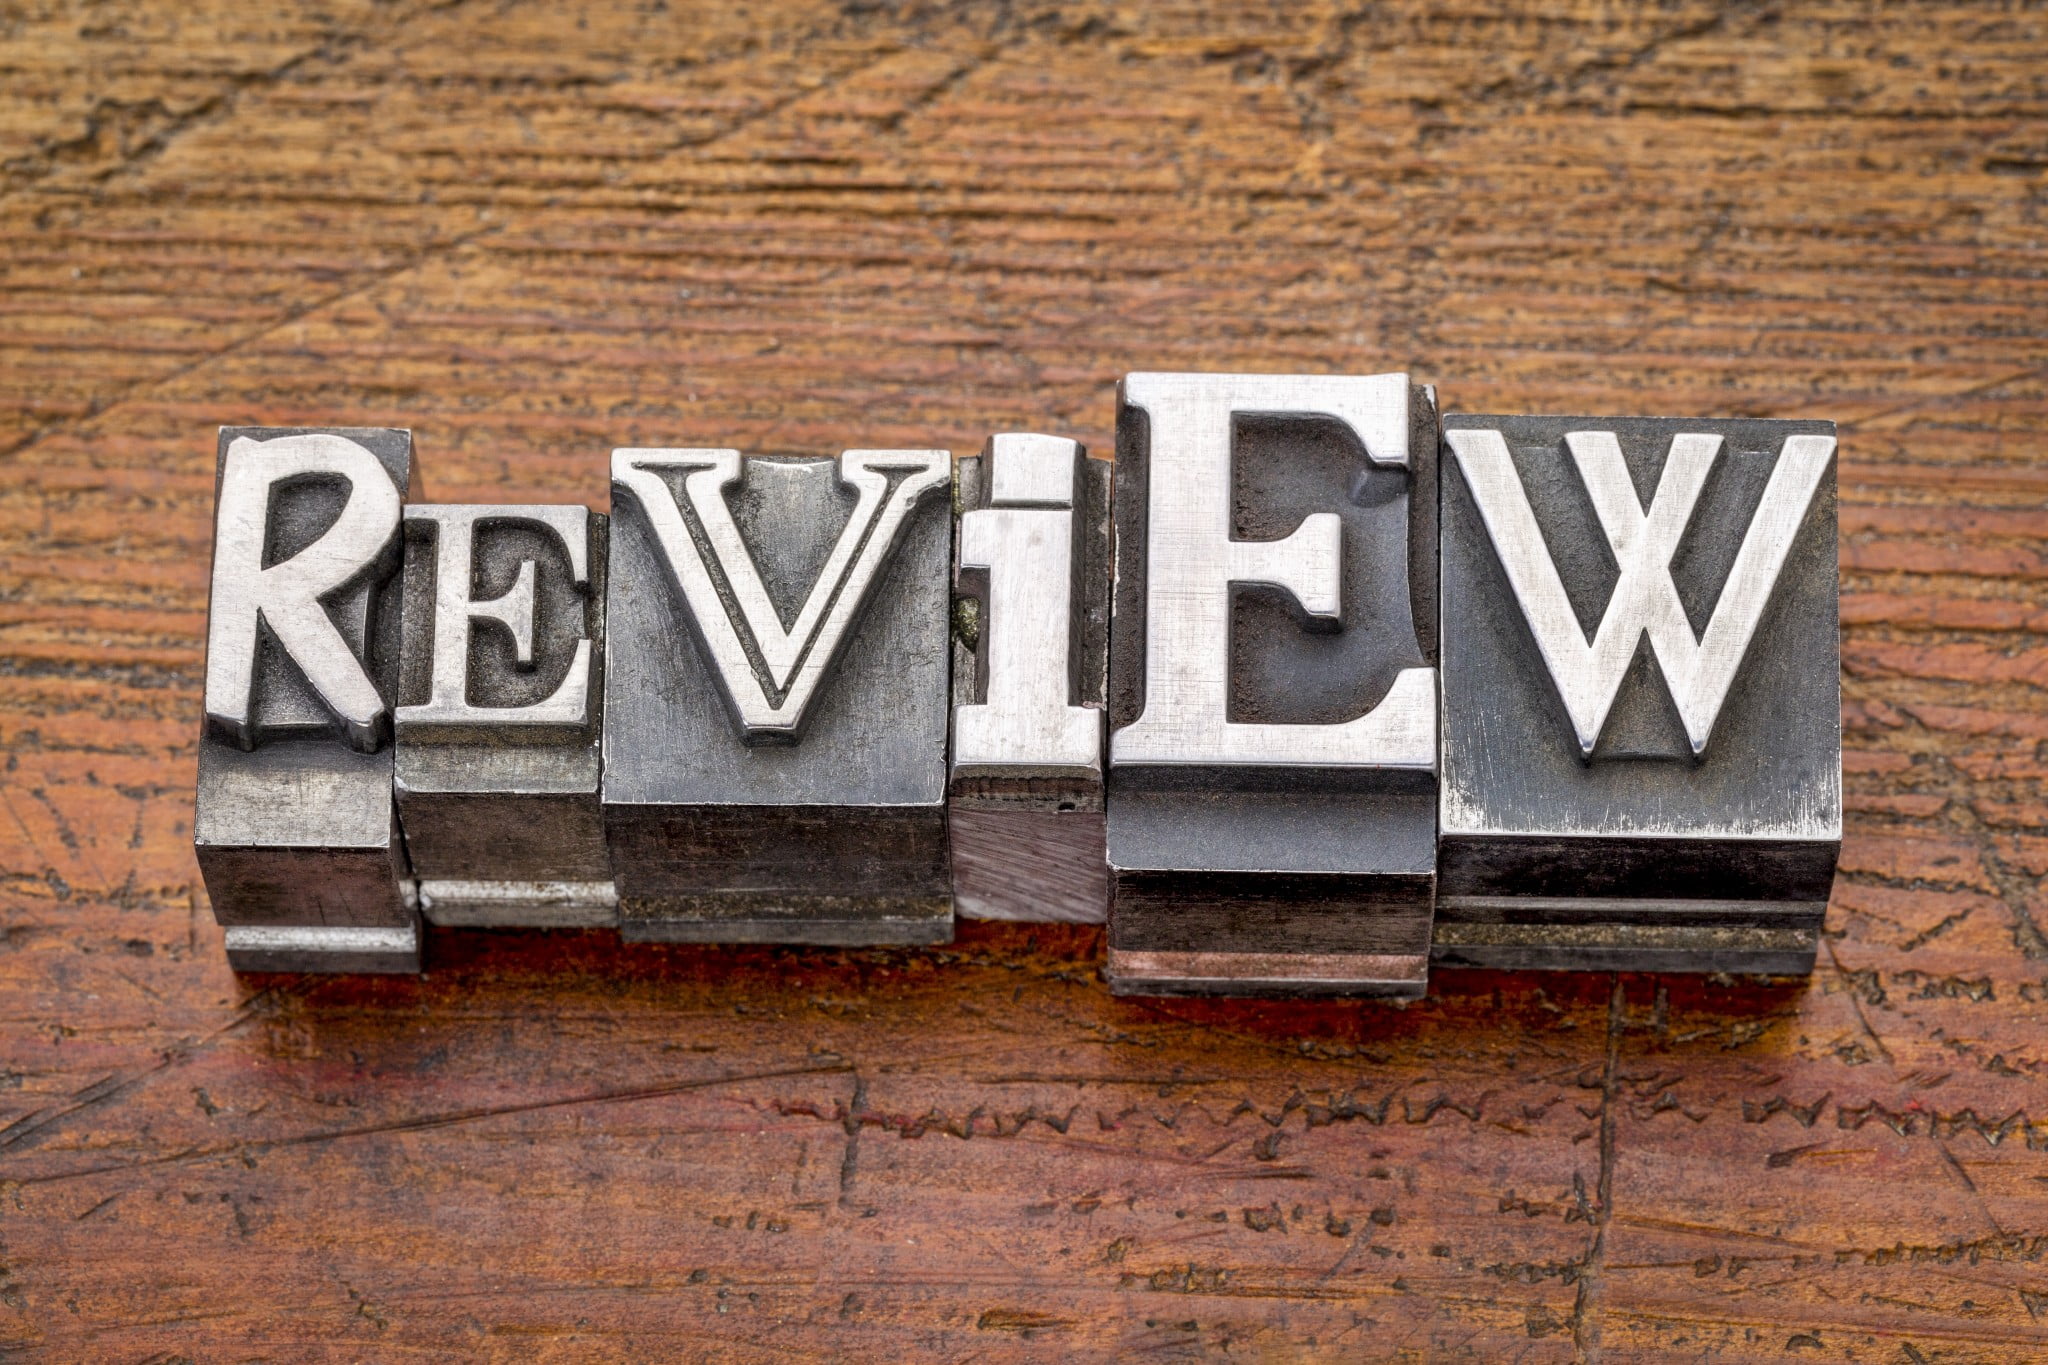 Word "review" in metal type